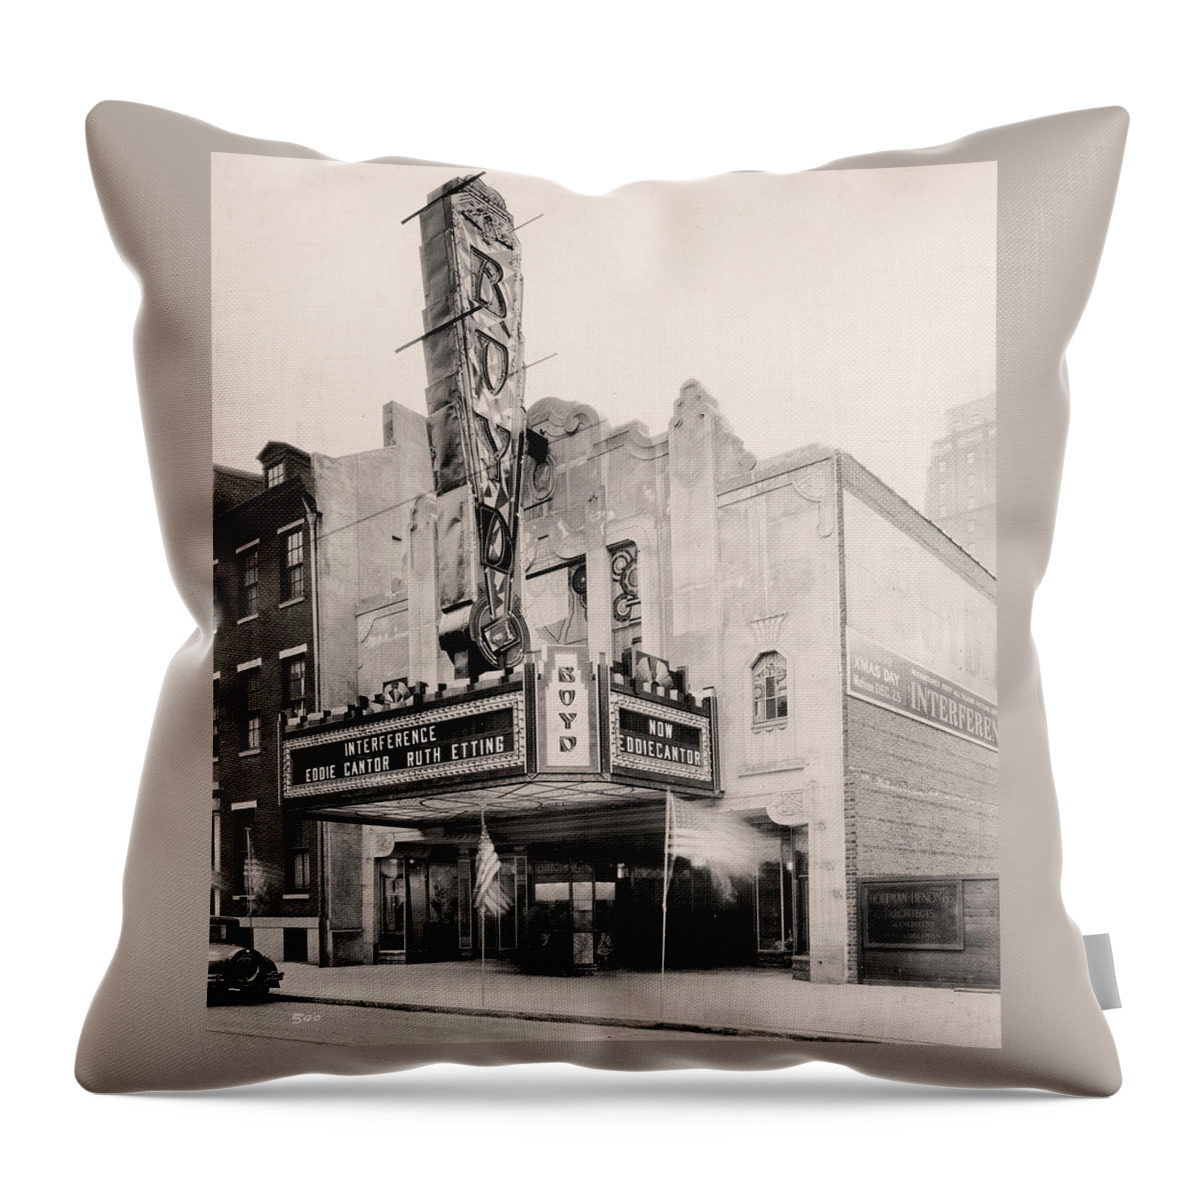 Interference Throw Pillow featuring the photograph Boyd Theater by E C Luks